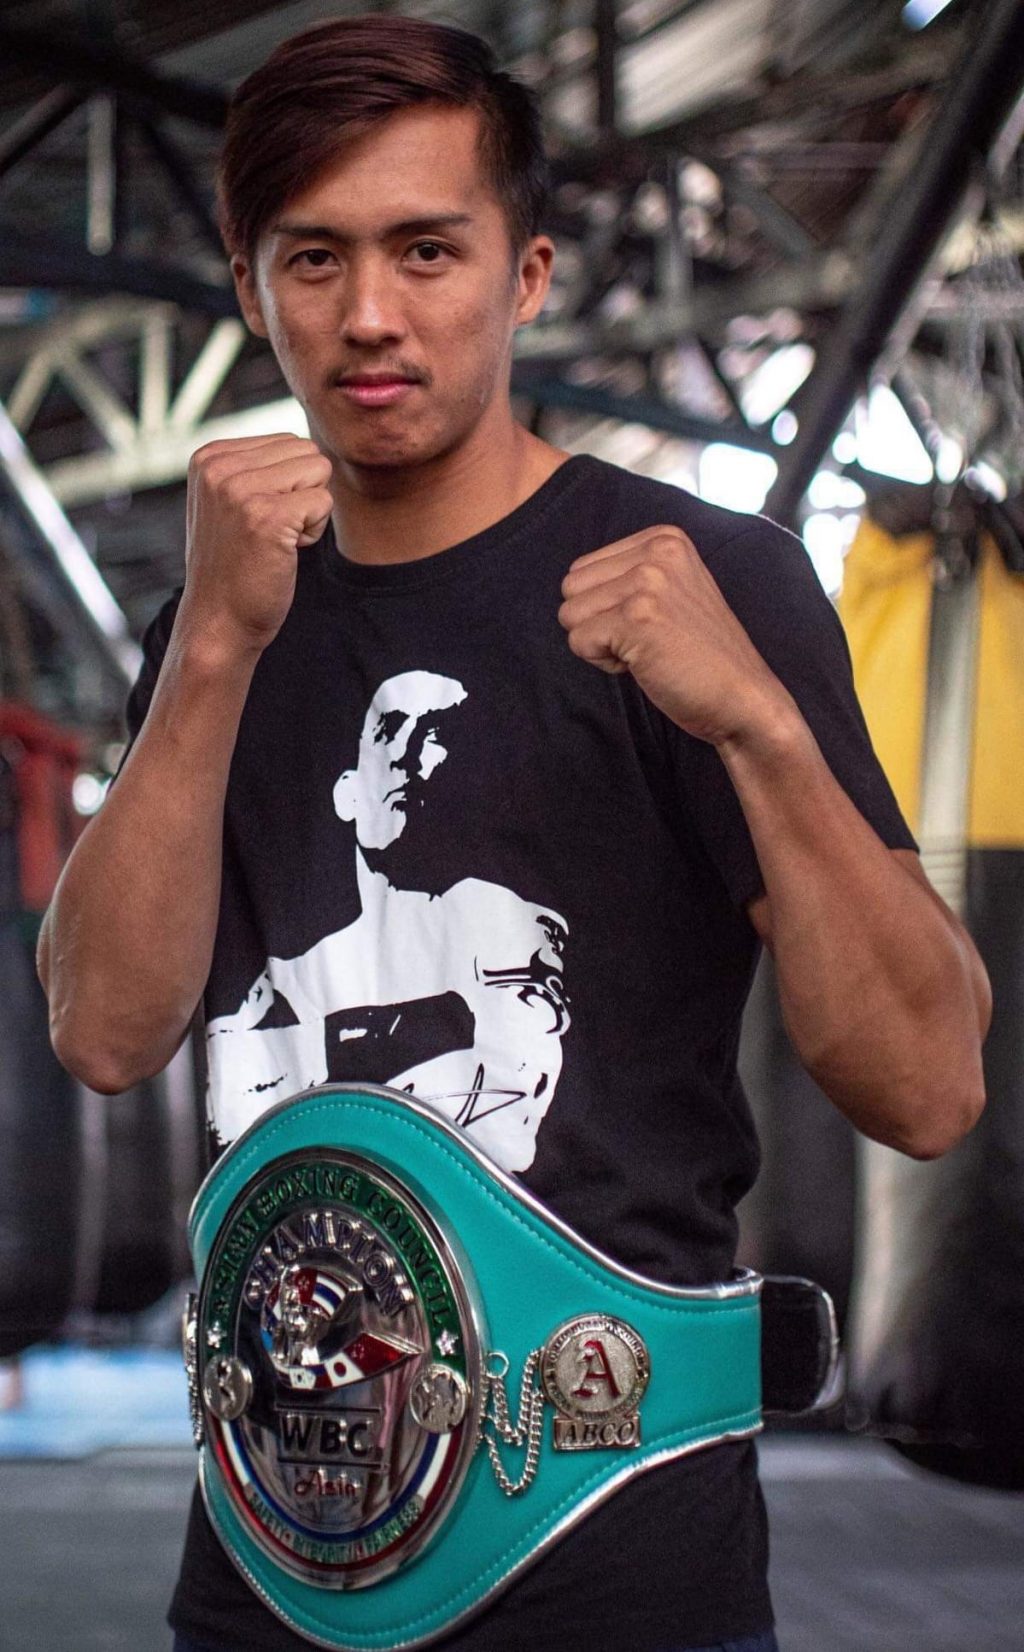 Kwong to challenge Luangphon for WBC Asia super bantamweight title